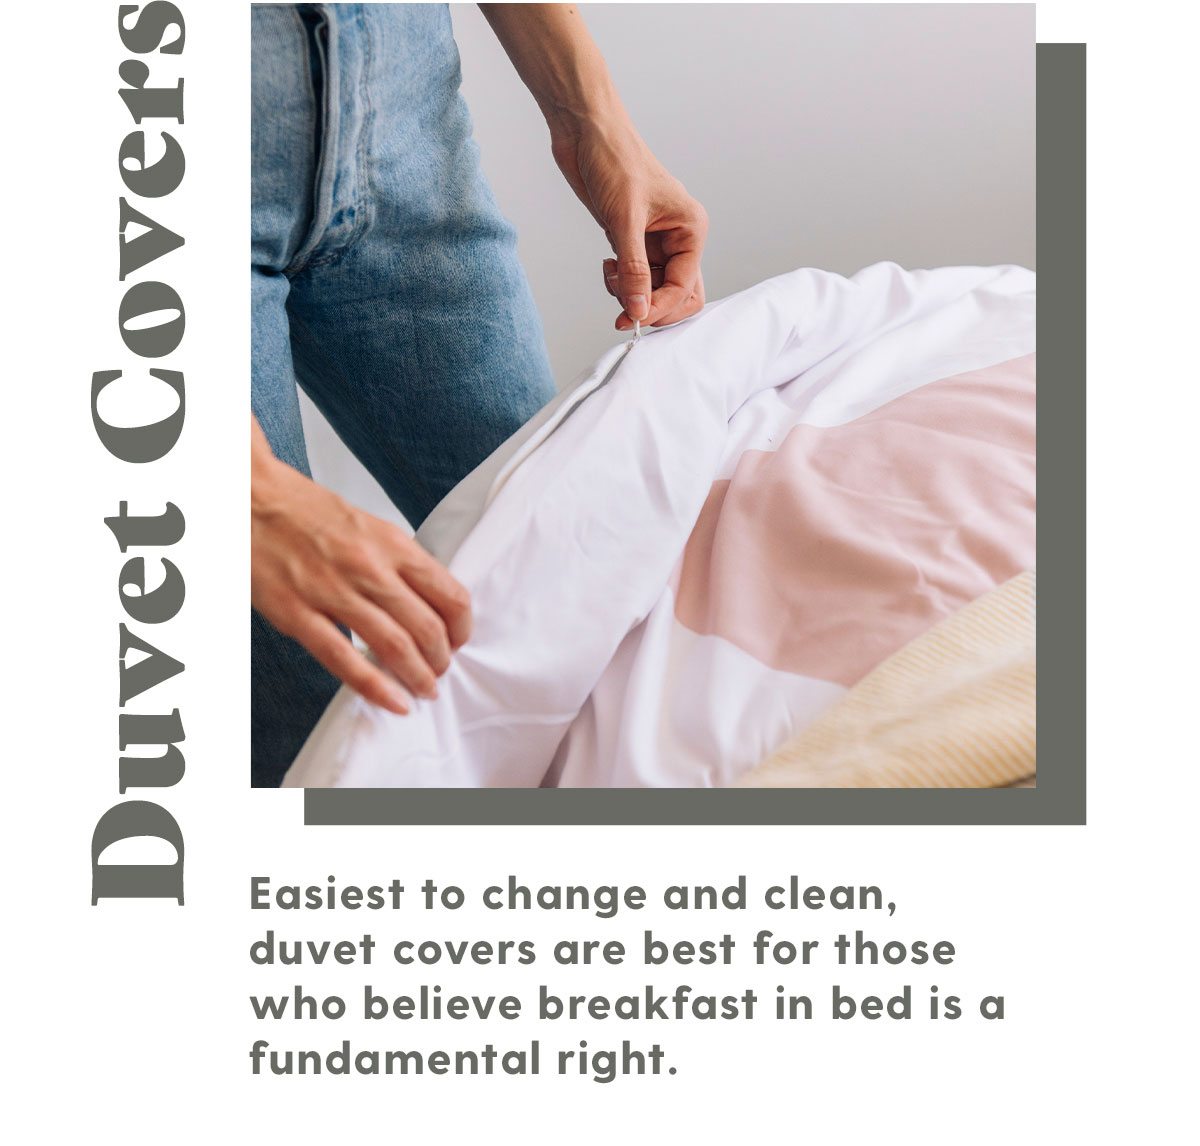 Duvet Covers: Easiest to change and clean, duvet covers are best for those who believe breakfast in bed is a fundamental right.